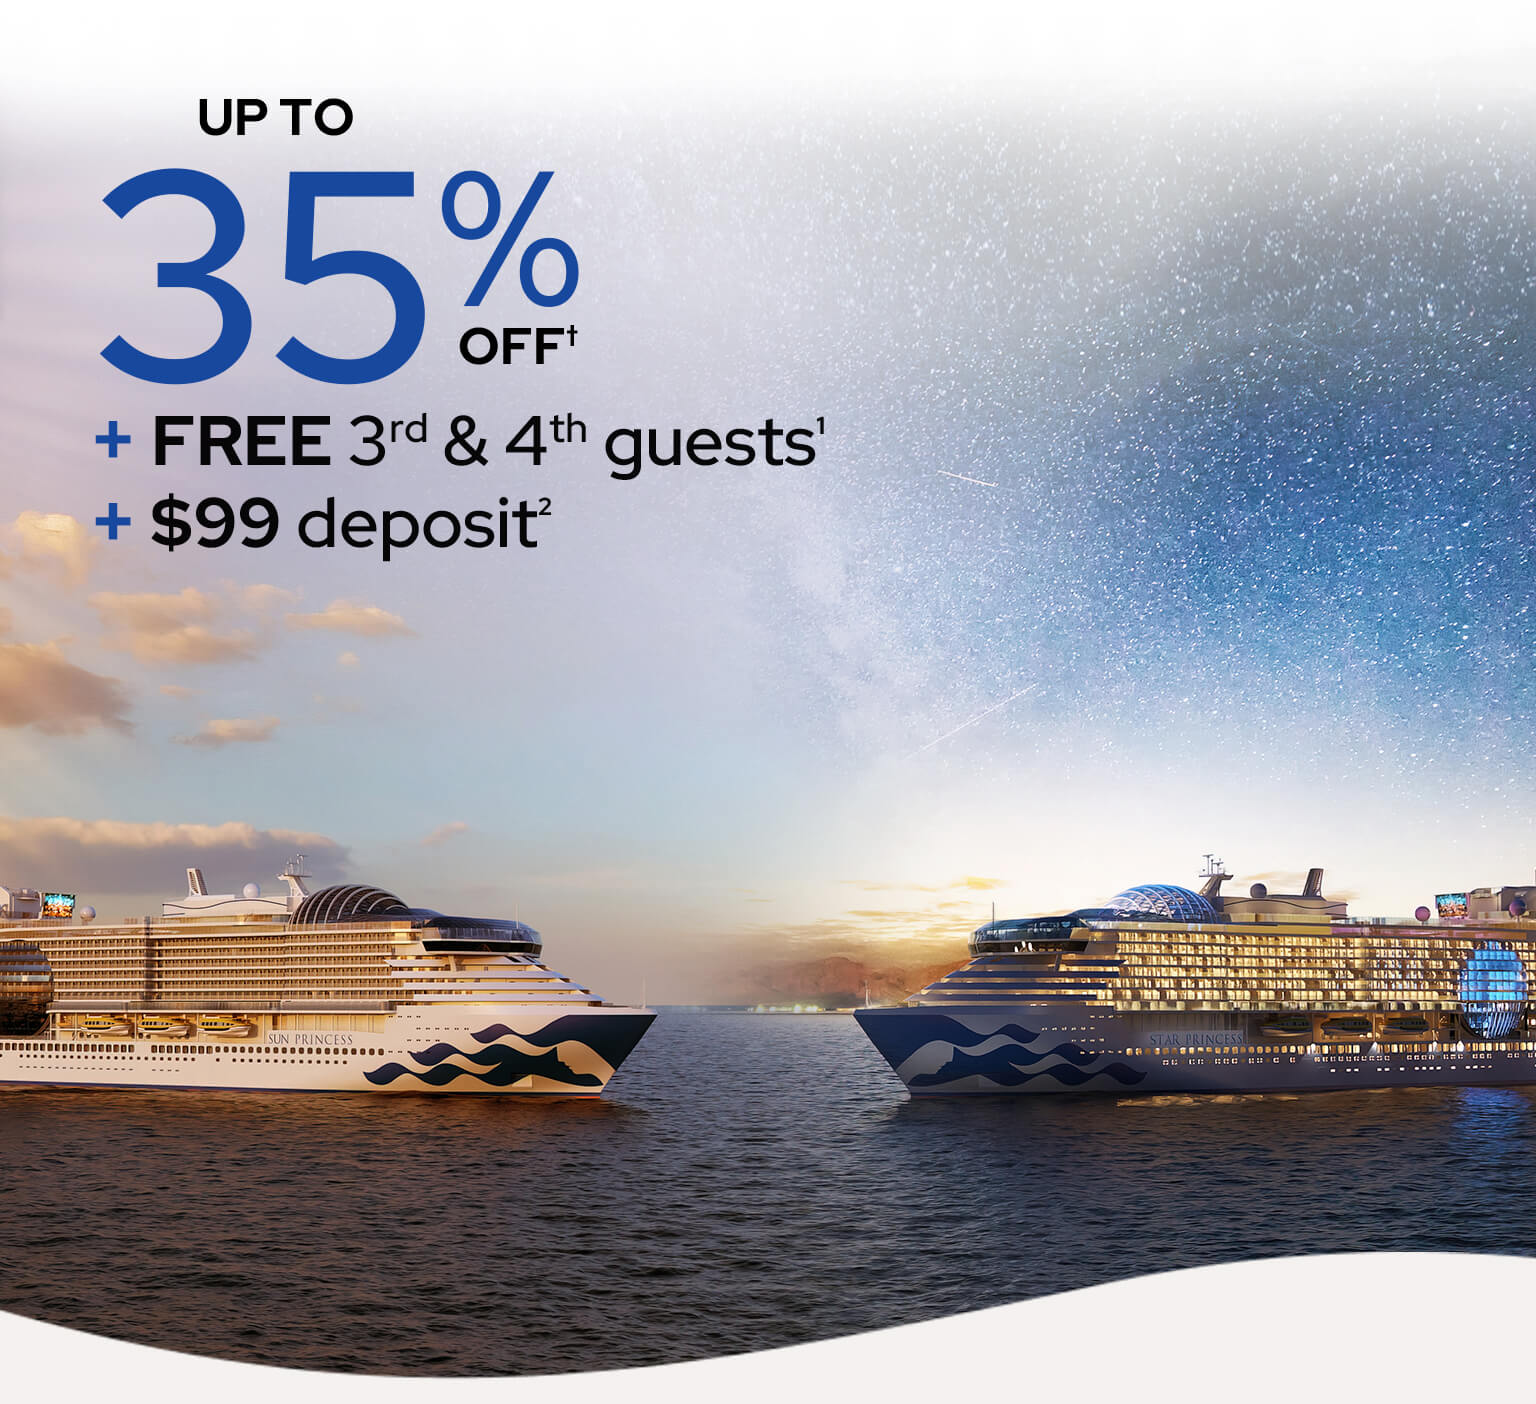 Up to 35% off† plus free 3rd and 4th guests plus $99 deposit.